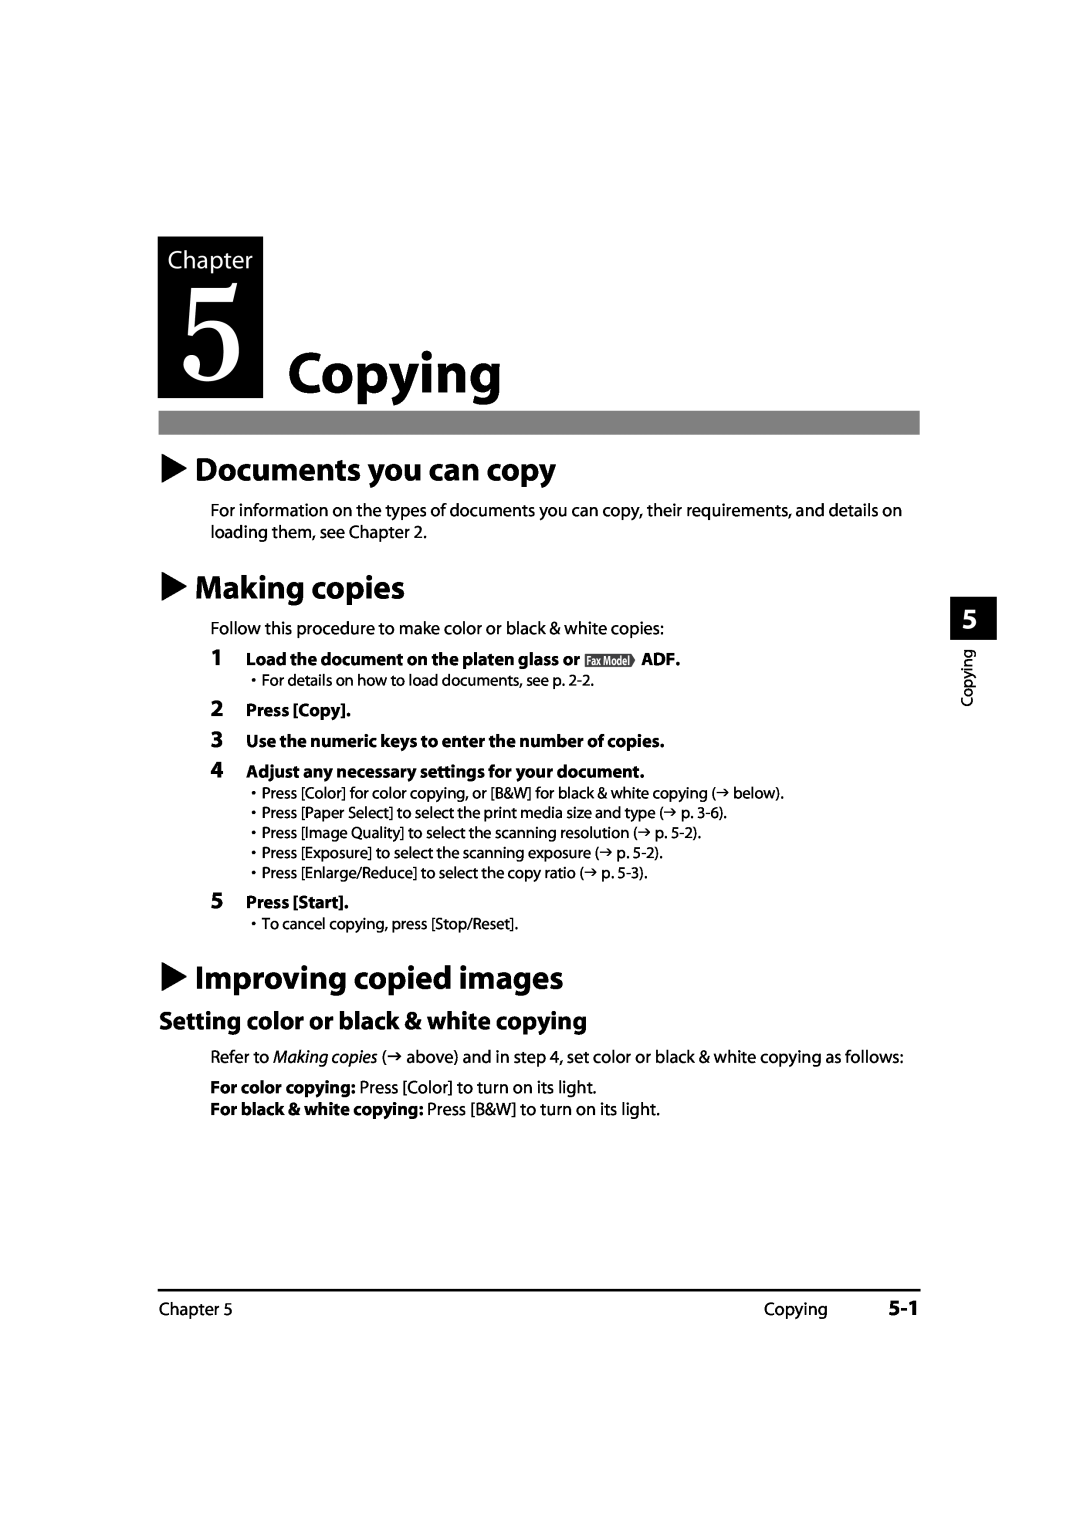 Canon MultiPASS MP730, 730i Copying, Documents you can copy, Making copies, Improving copied images, Chapter, Press Start 